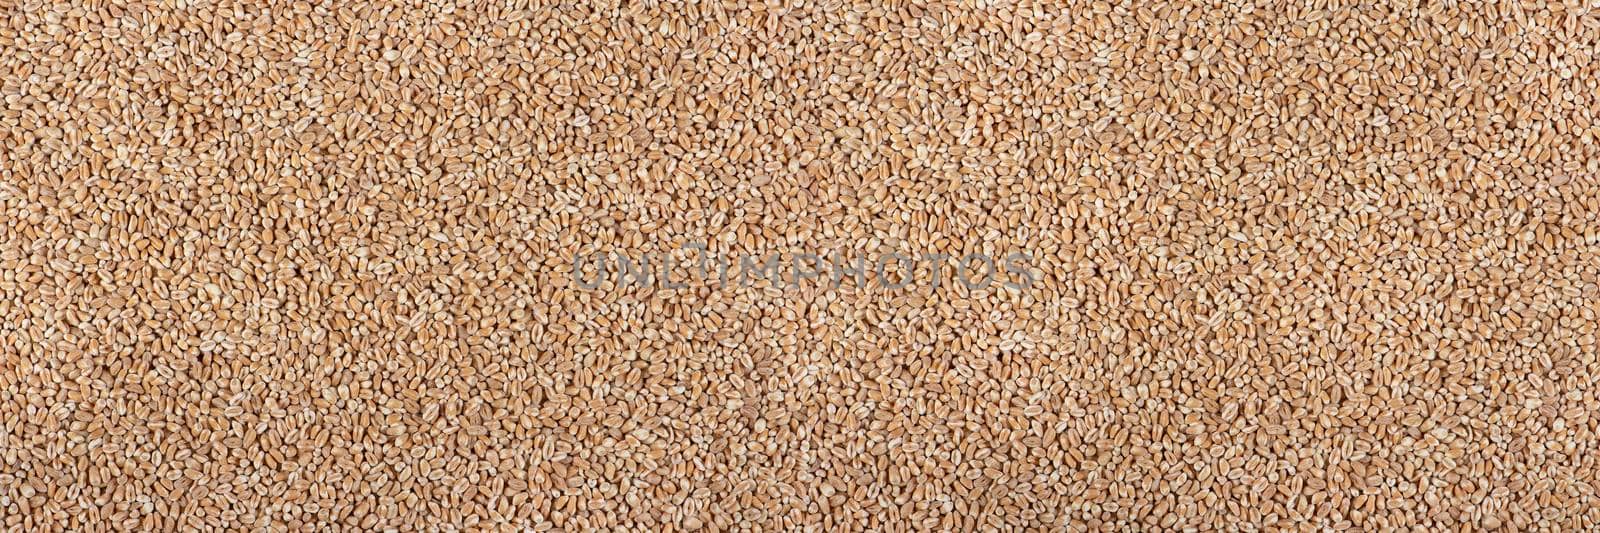 Texture of wheat, grains. Background for dry wheat design. Large size for banner printing or packaging. Top view of an evenly scattered grain of wheat